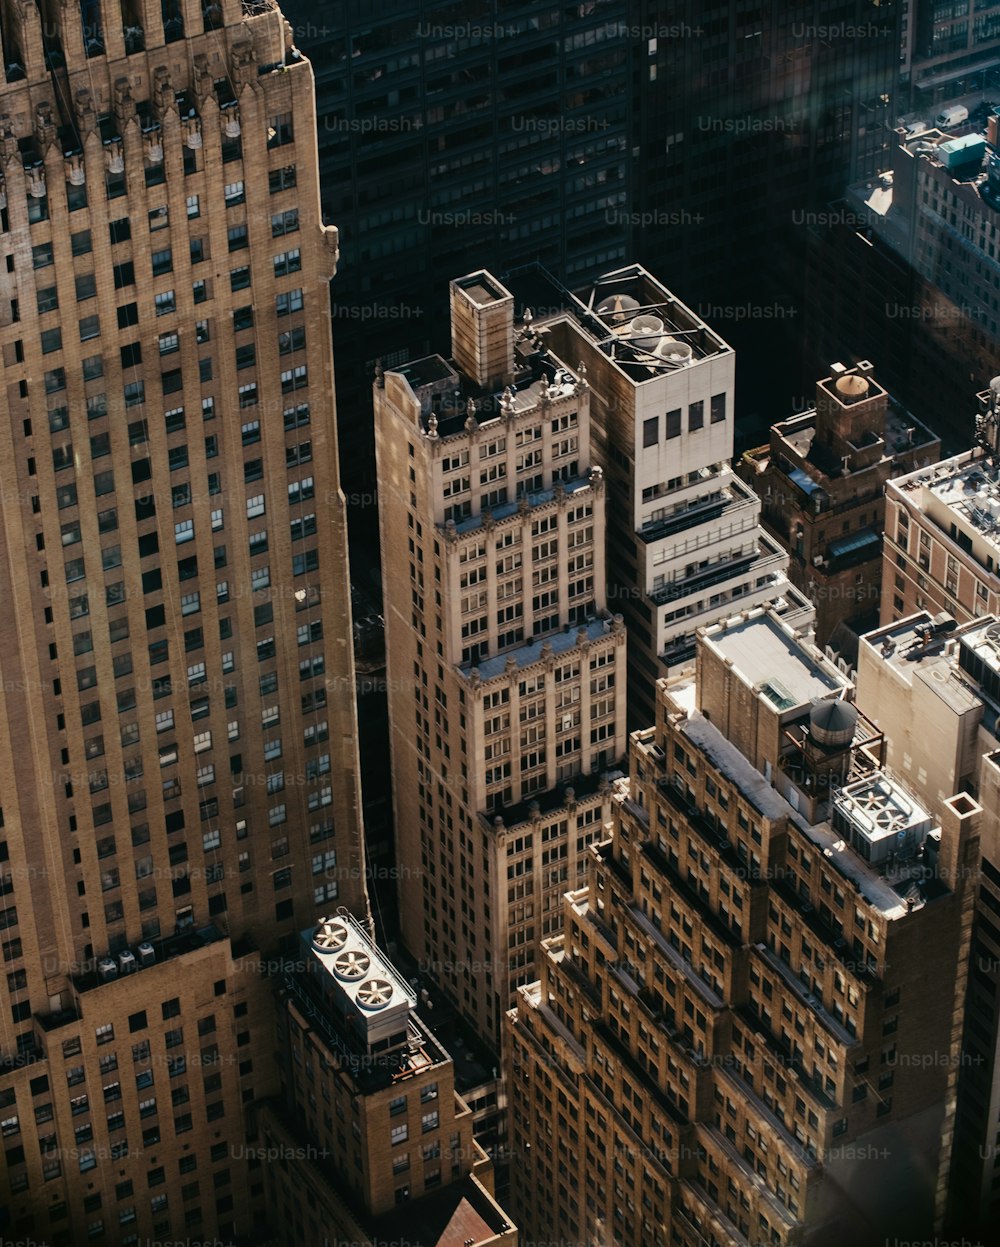 an aerial view of a city with tall buildings